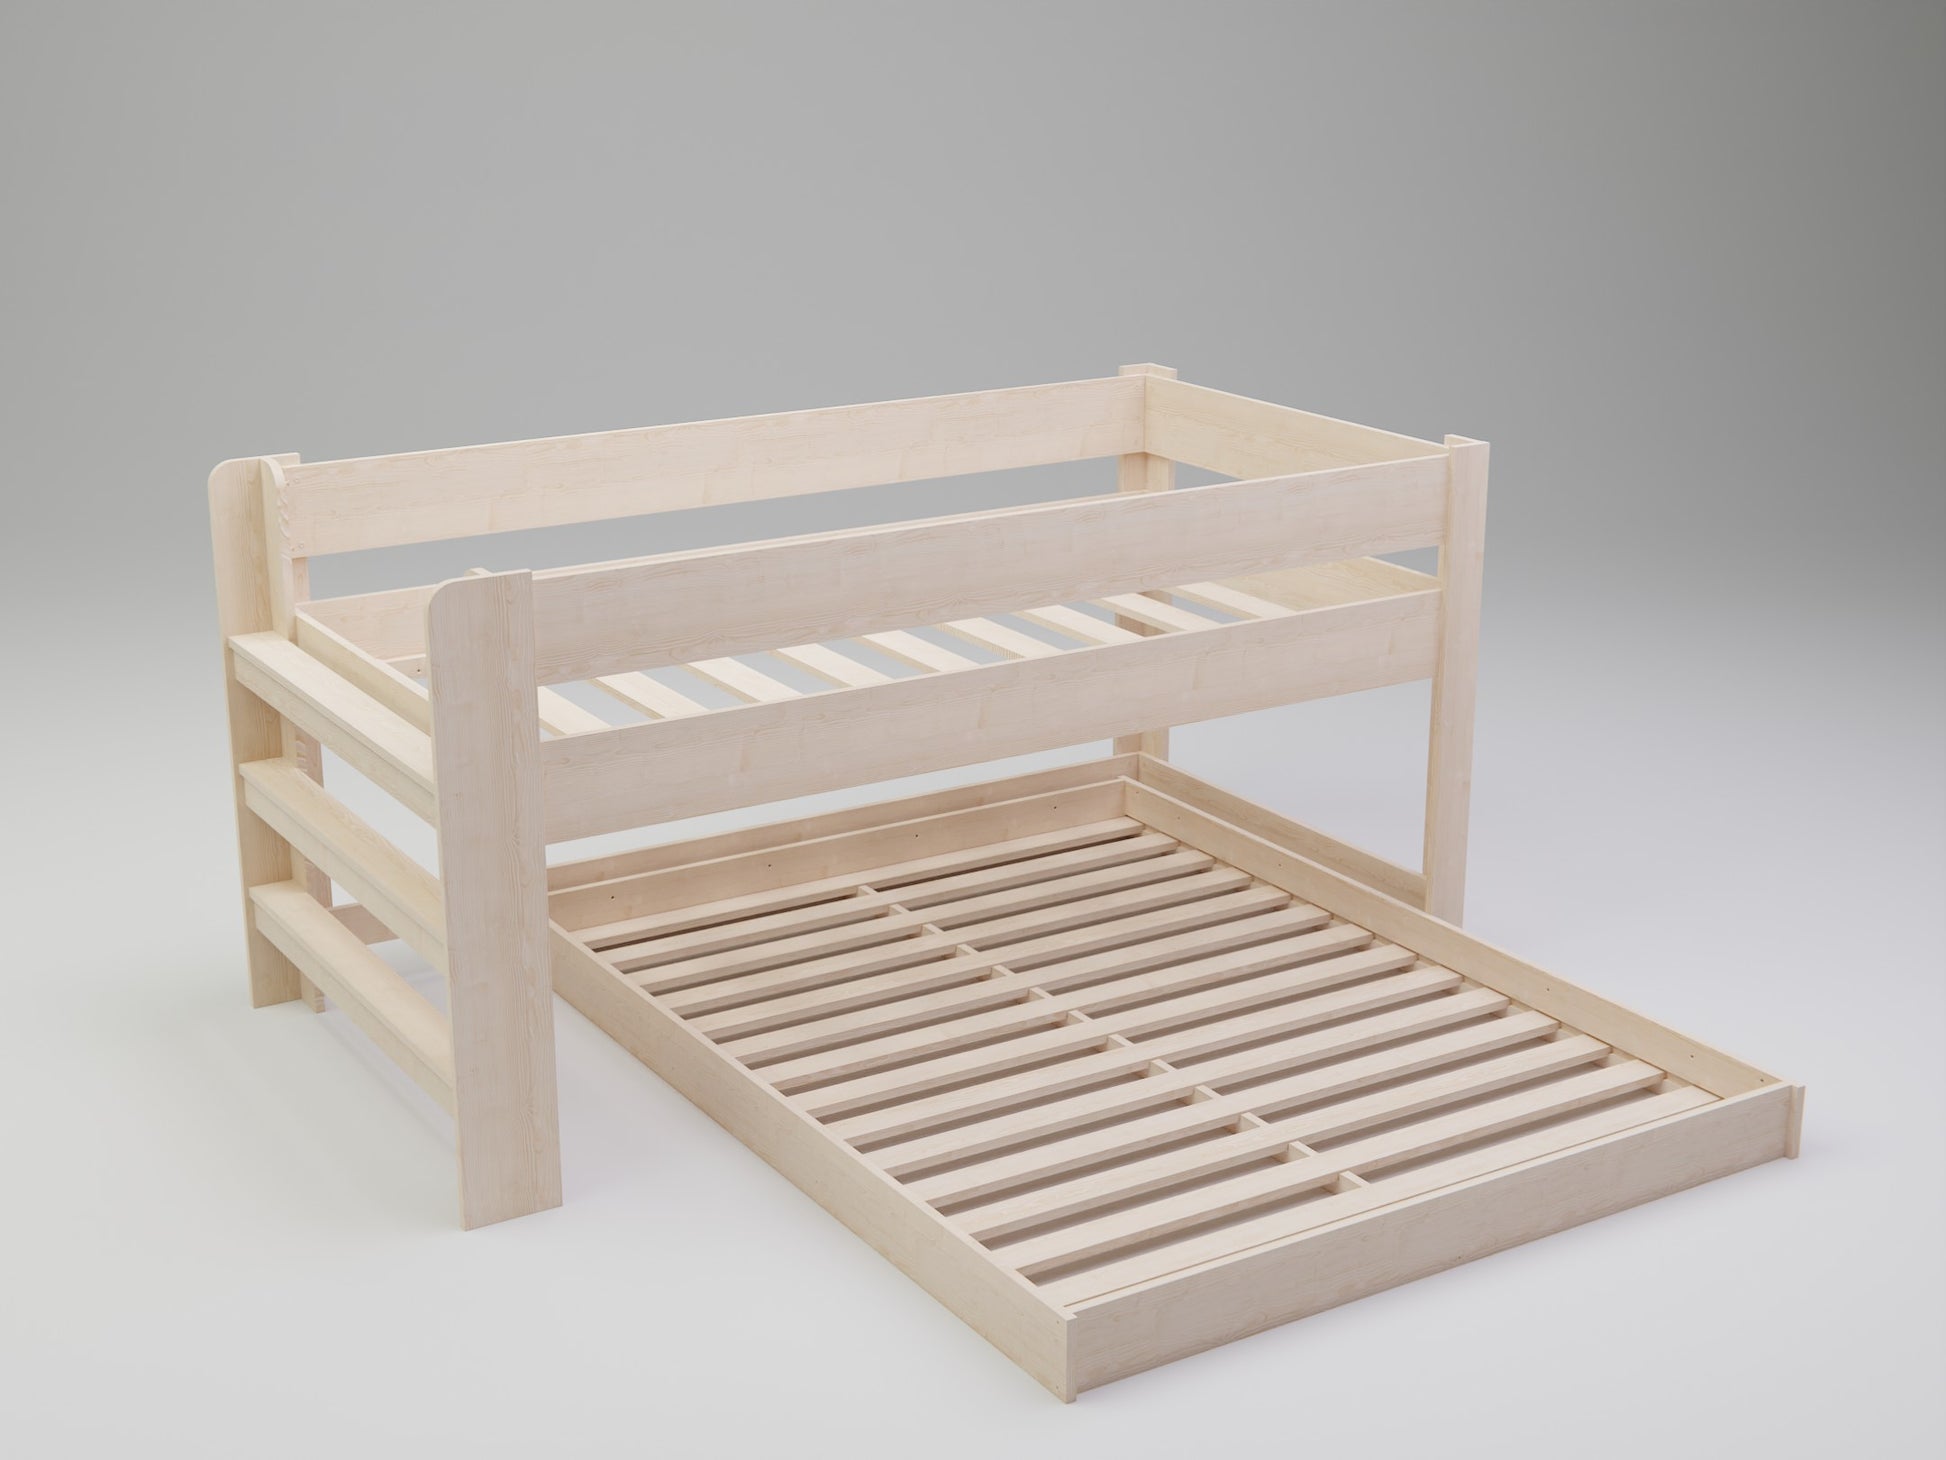 Maximizing space and bonding: The L shaped bed perfect for siblings is now a click away.